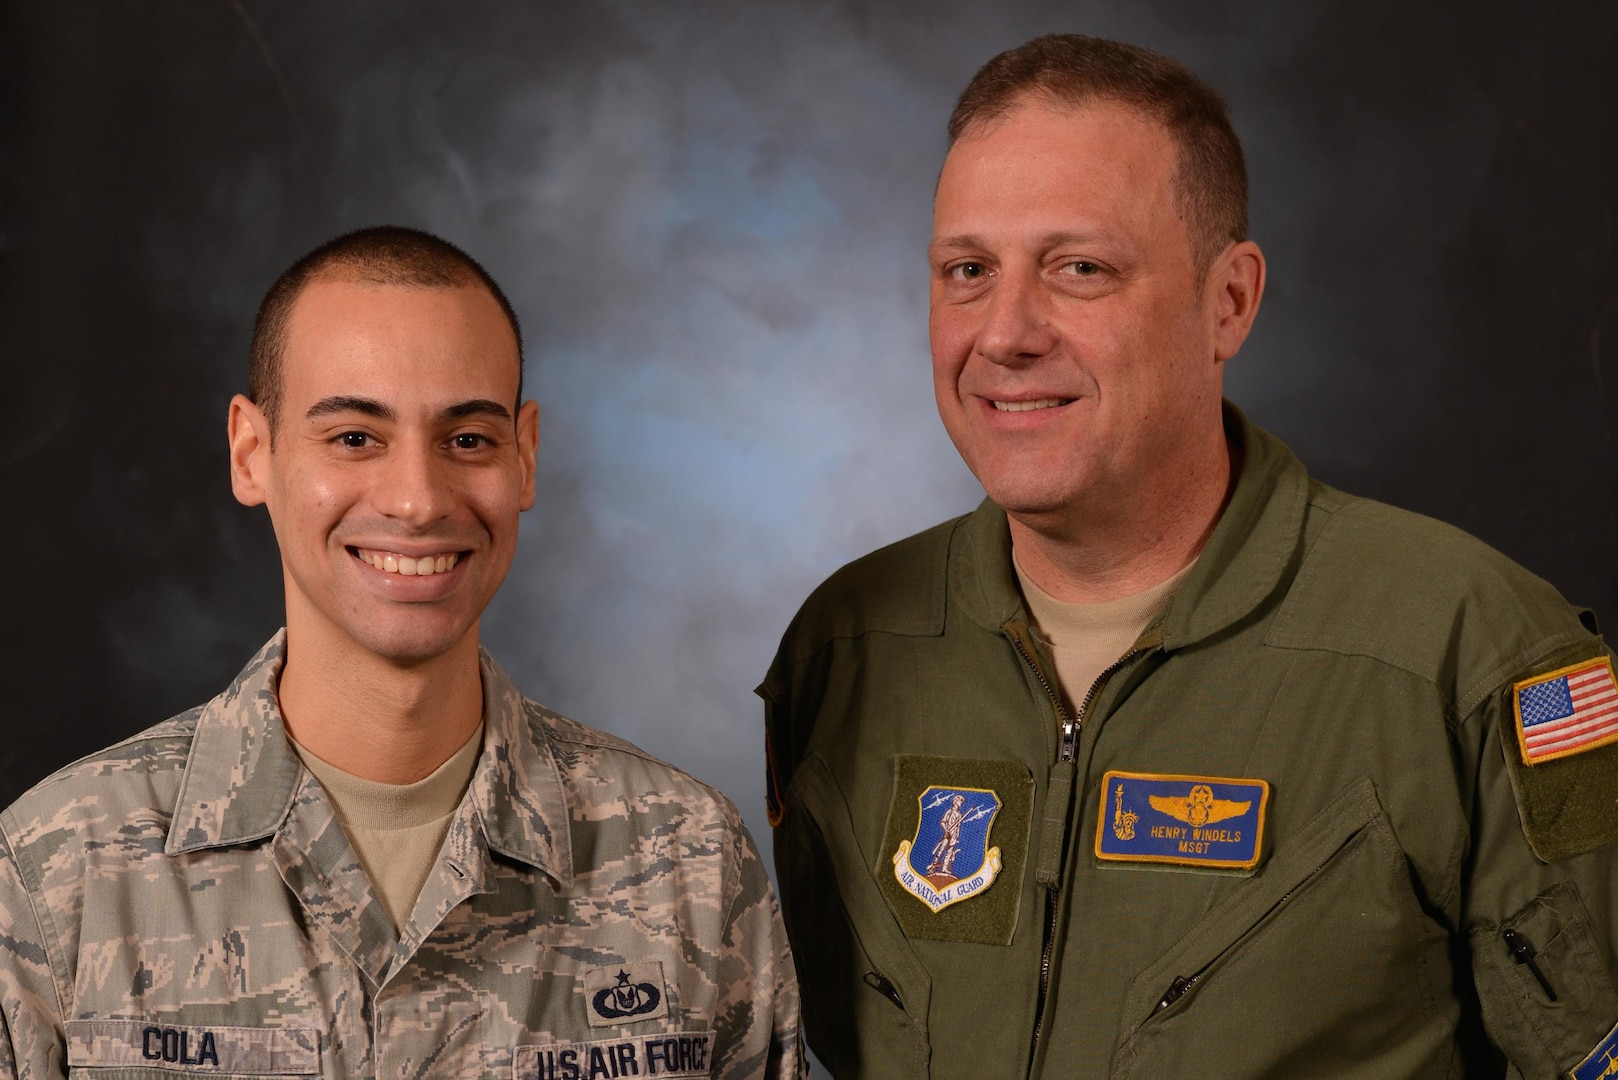 New York Air National Guard Staff Sgt. Daniel Cola, left, and Master Sgt. Henry Windels pose for a photo at Stewart Air National Guard Base, near Newburgh, New York, Dec. 23, 2015. Windels donated a kidney to Cola Oct. 6, 2015. Both men are members of the New York Air National Guard's 105th Airlift Wing.  